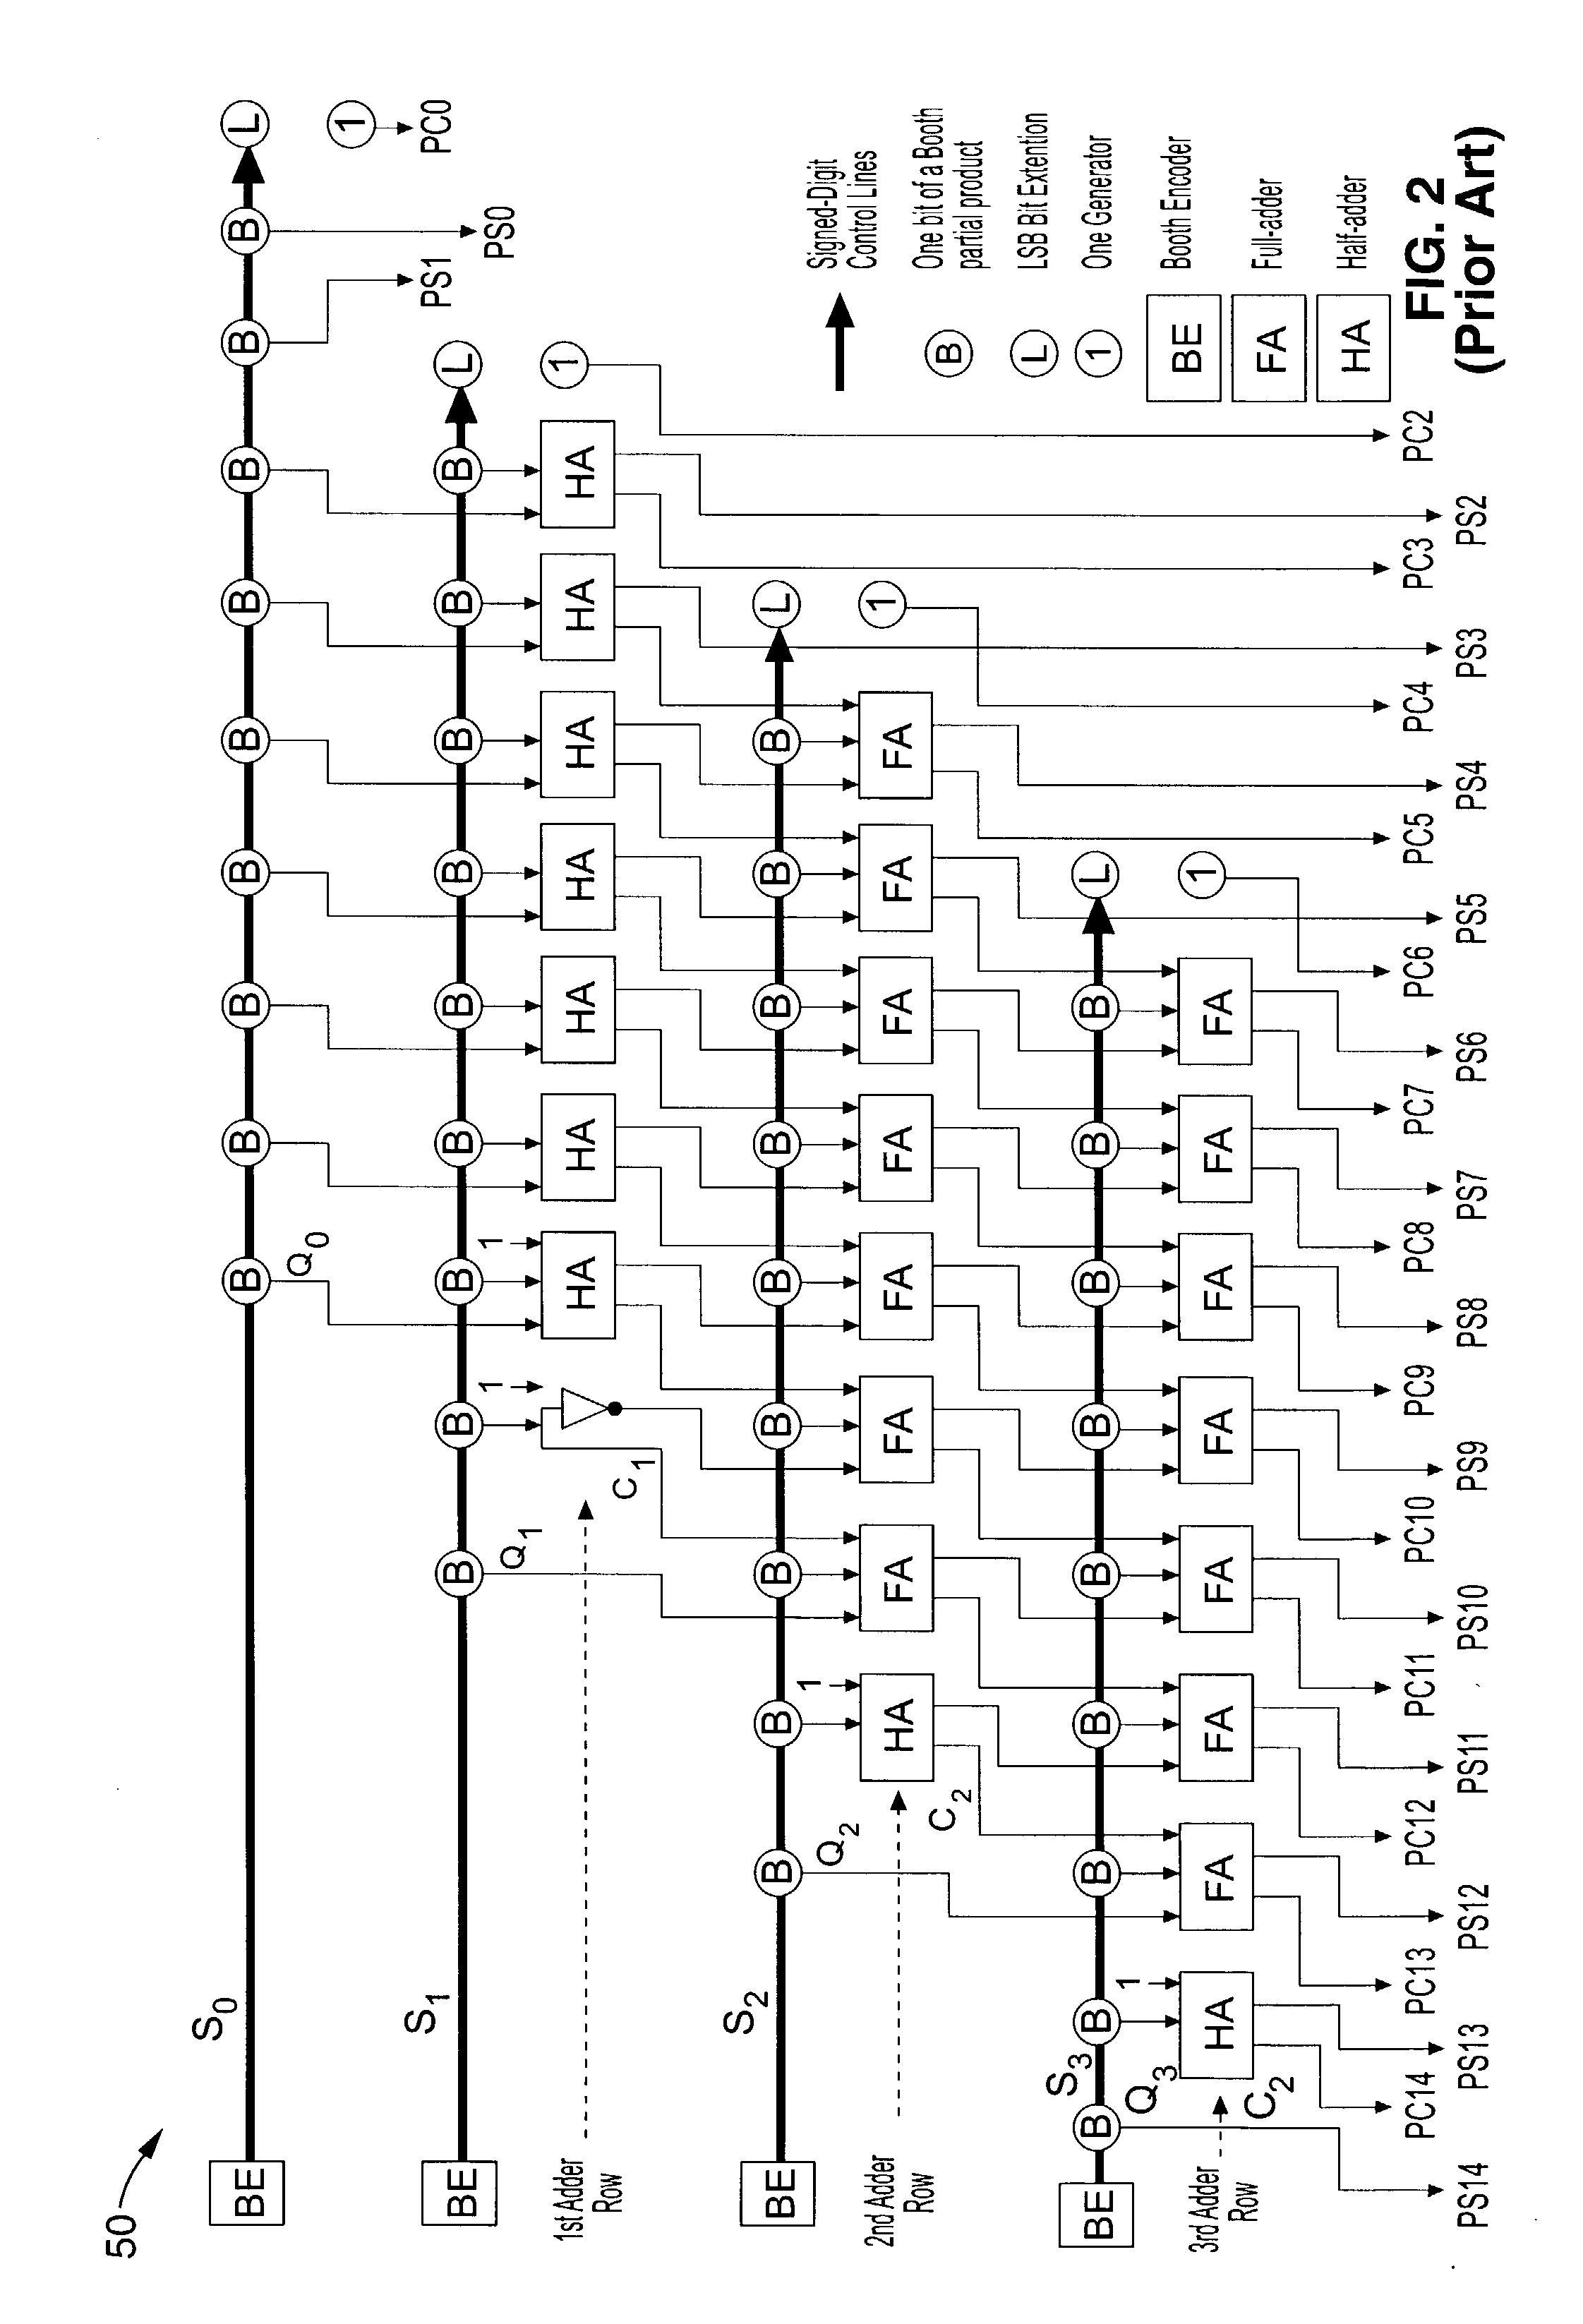 Low-power Booth-encoded array multiplier